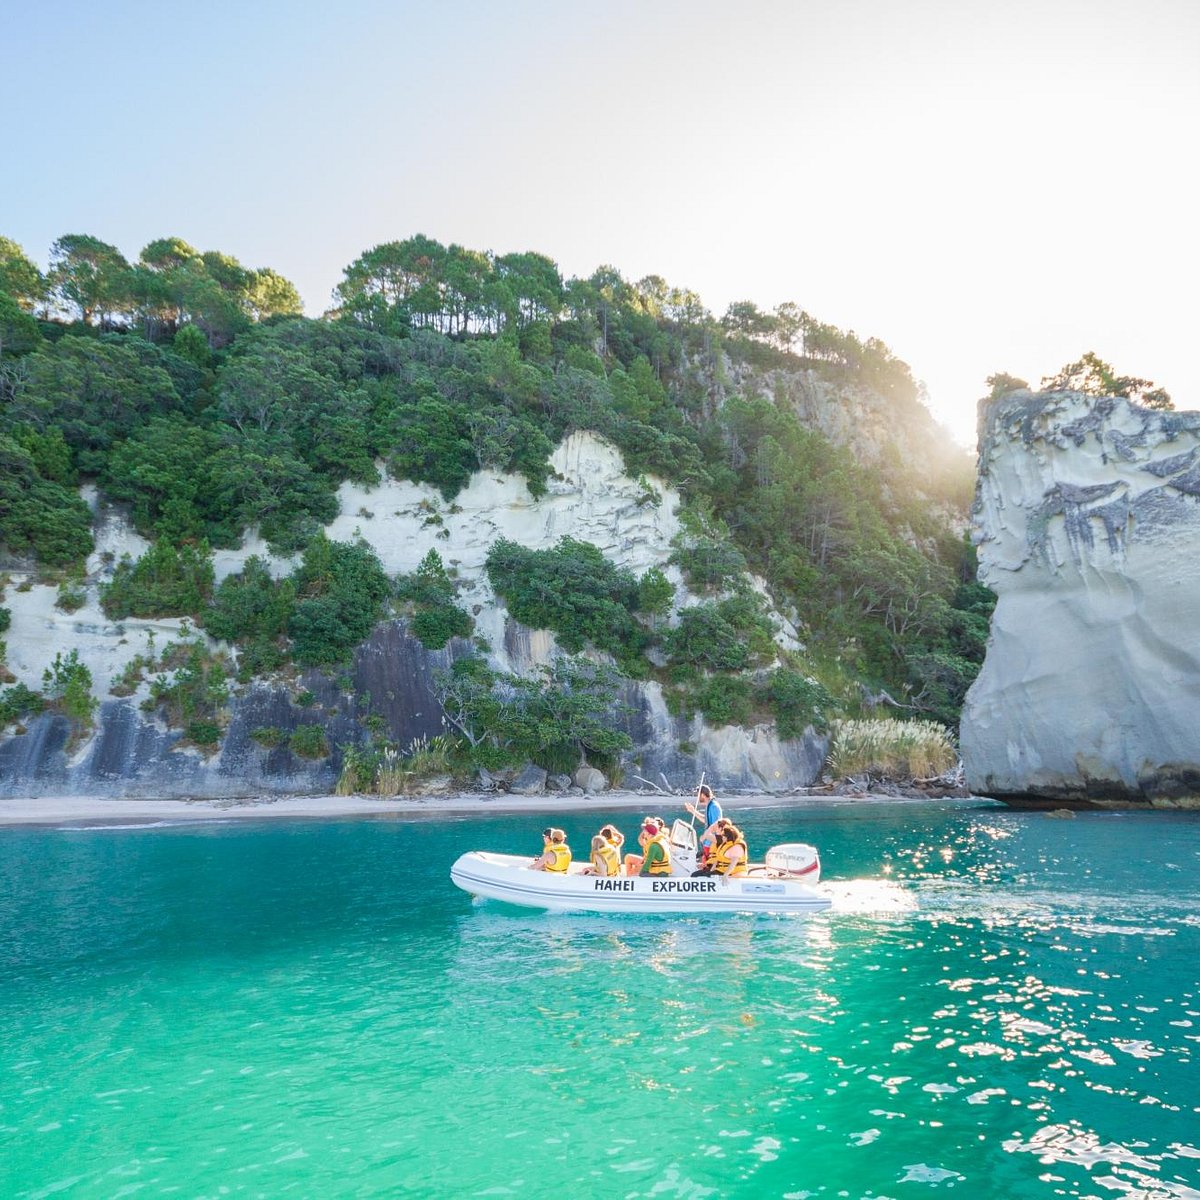 cathedral cove boat tour from hahei